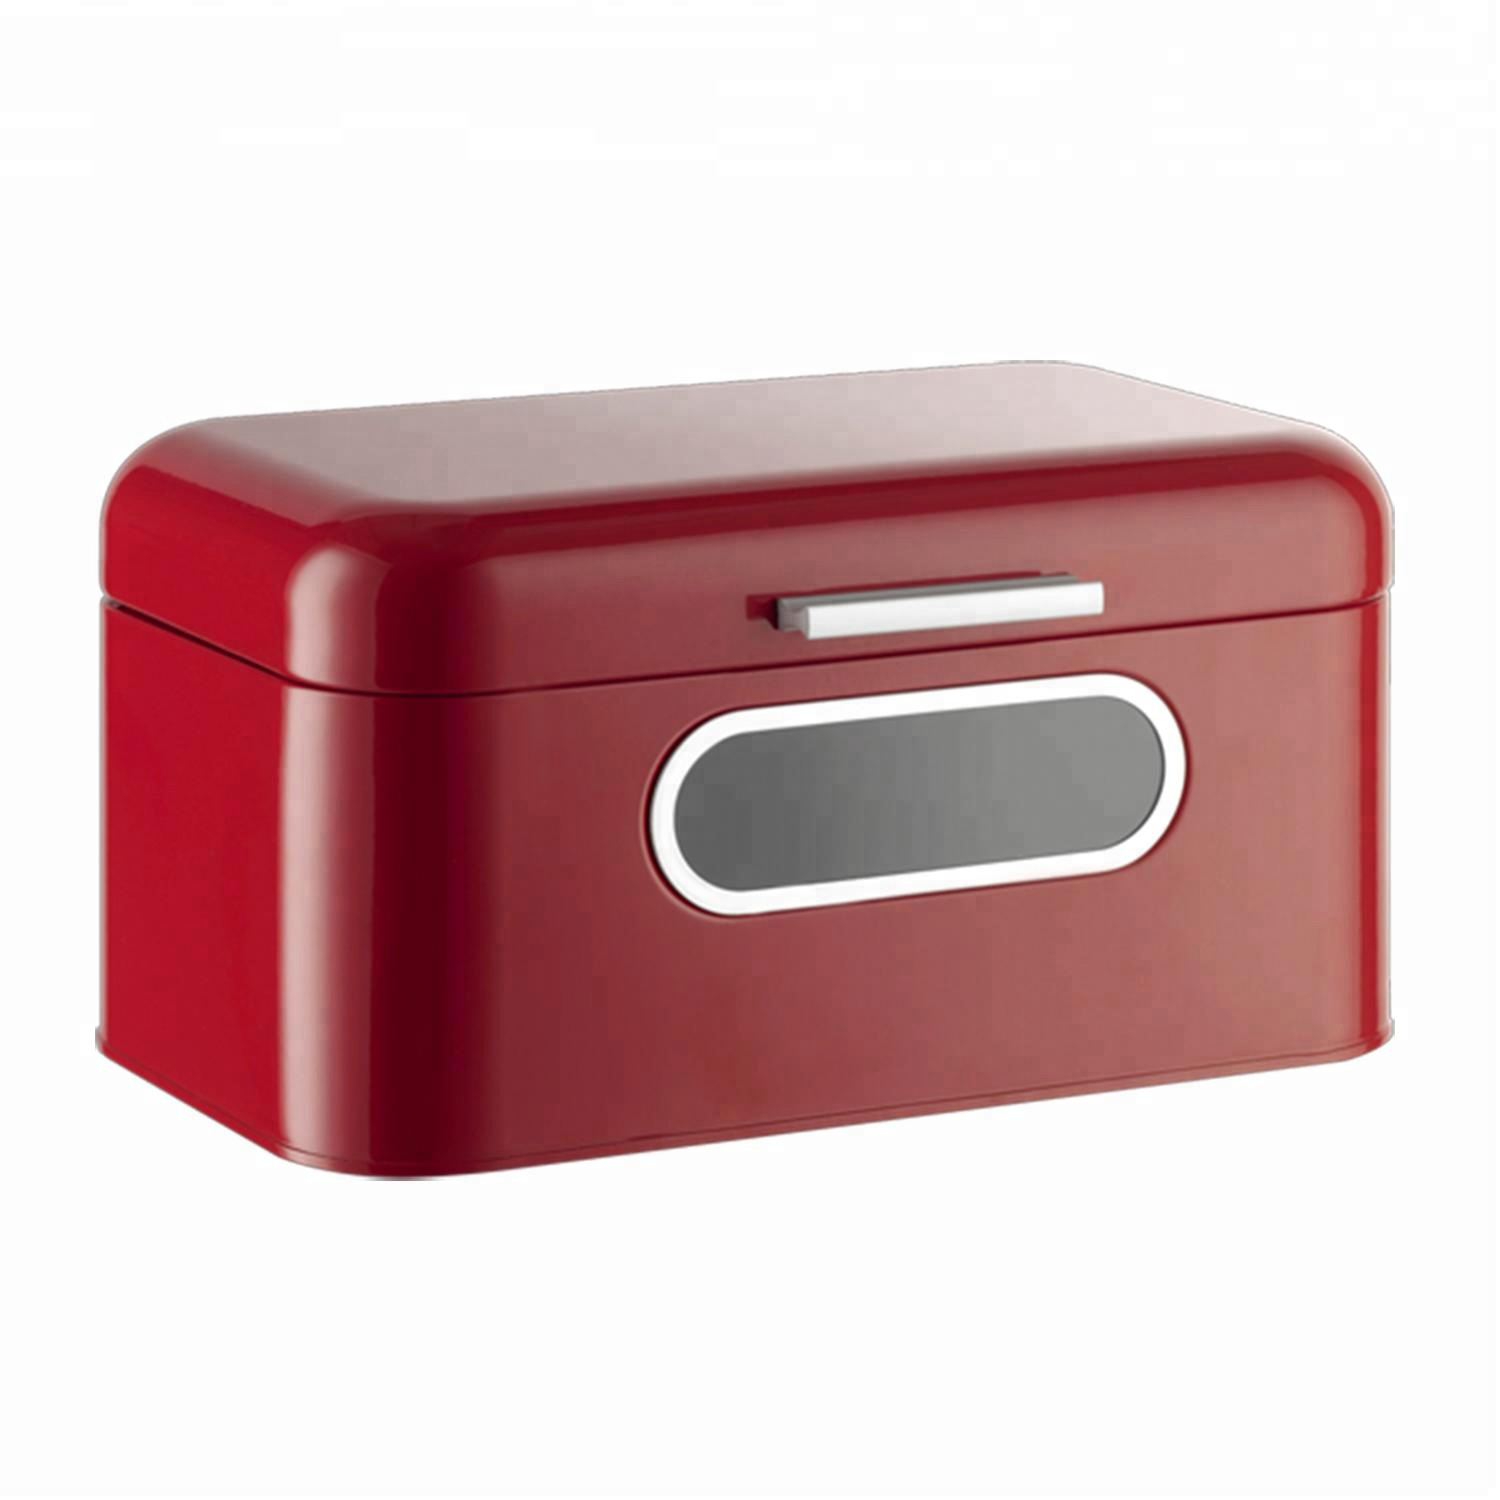 Kitchen Counter Bread Box   - Red Bread Bin, Retro Storage Container with Front Window, For Doughnuts, Pastries, Cookies